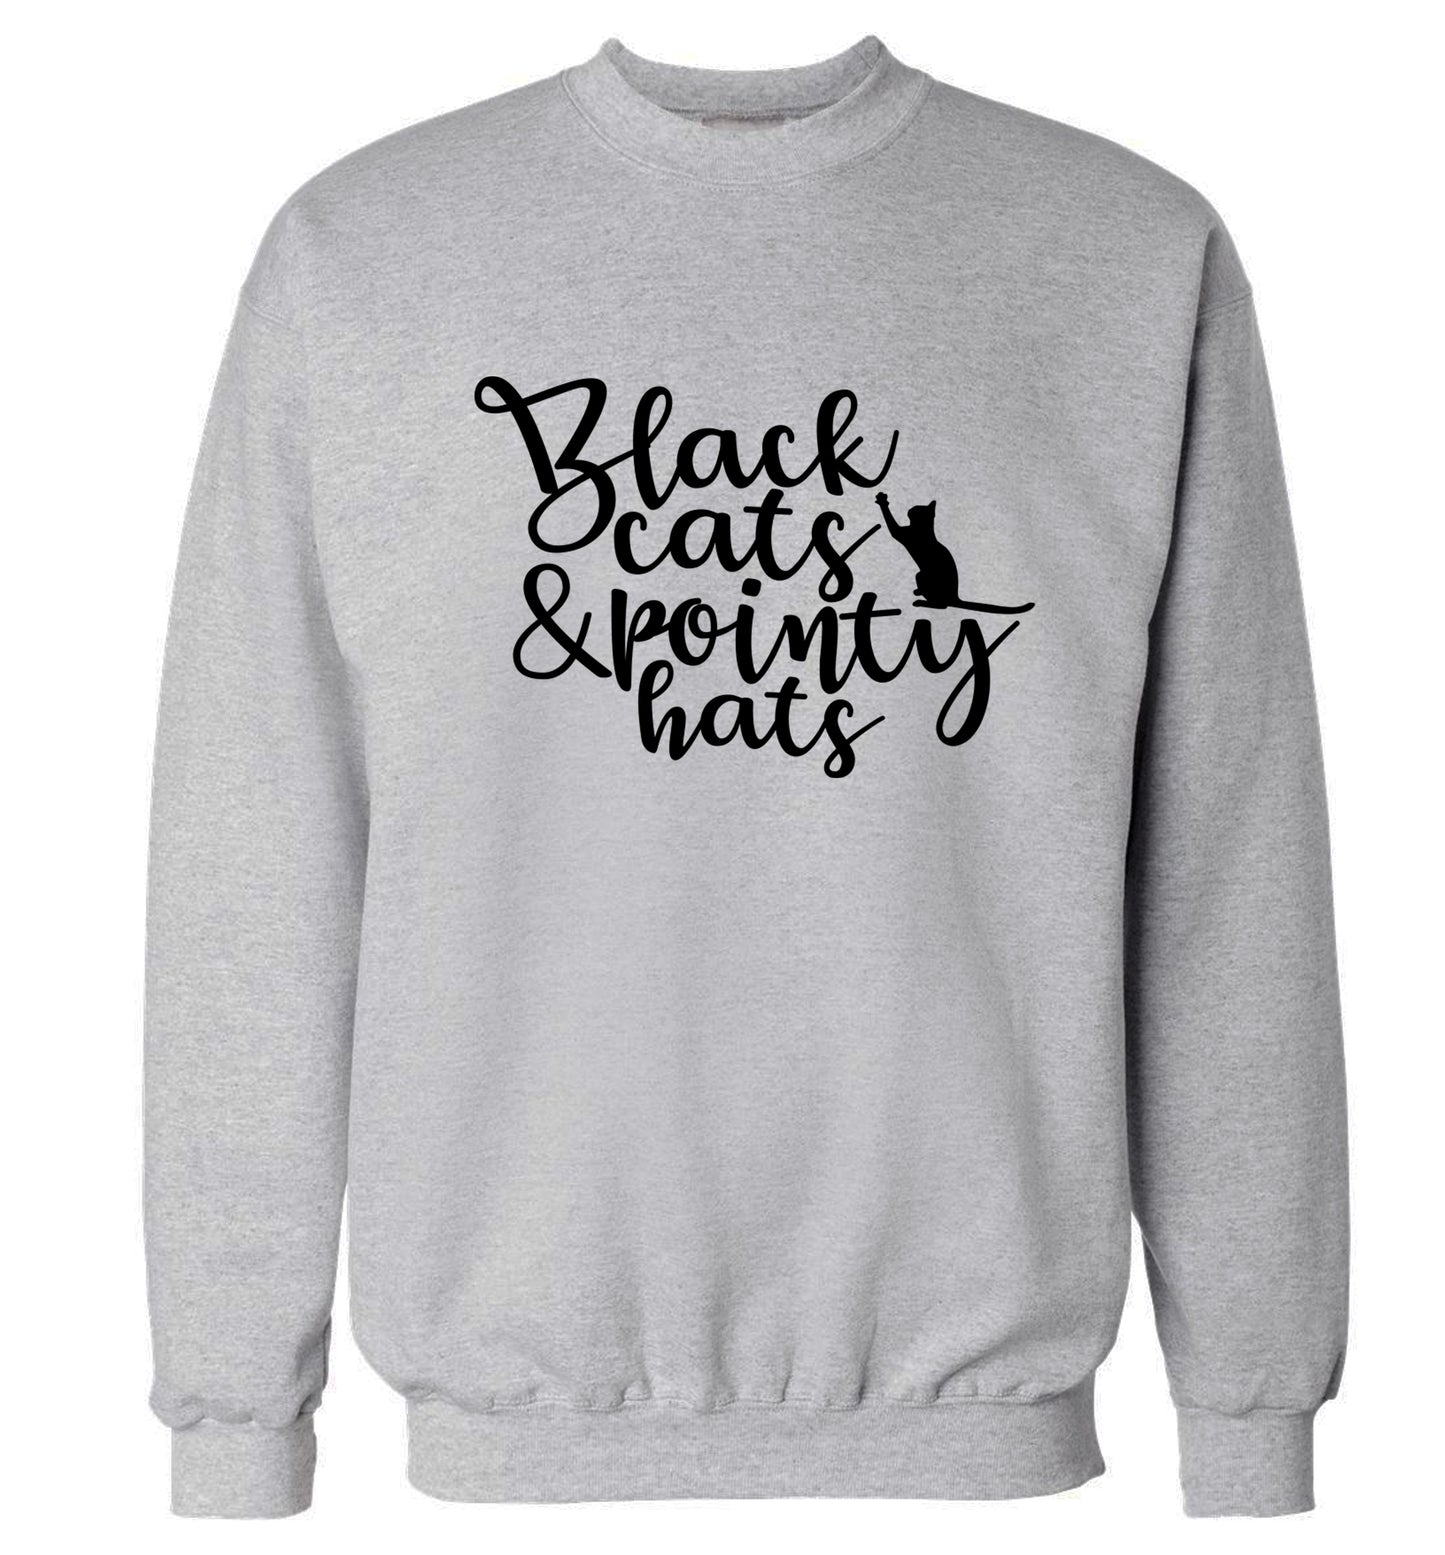 Black cats and pointy hats Adult's unisex grey Sweater 2XL